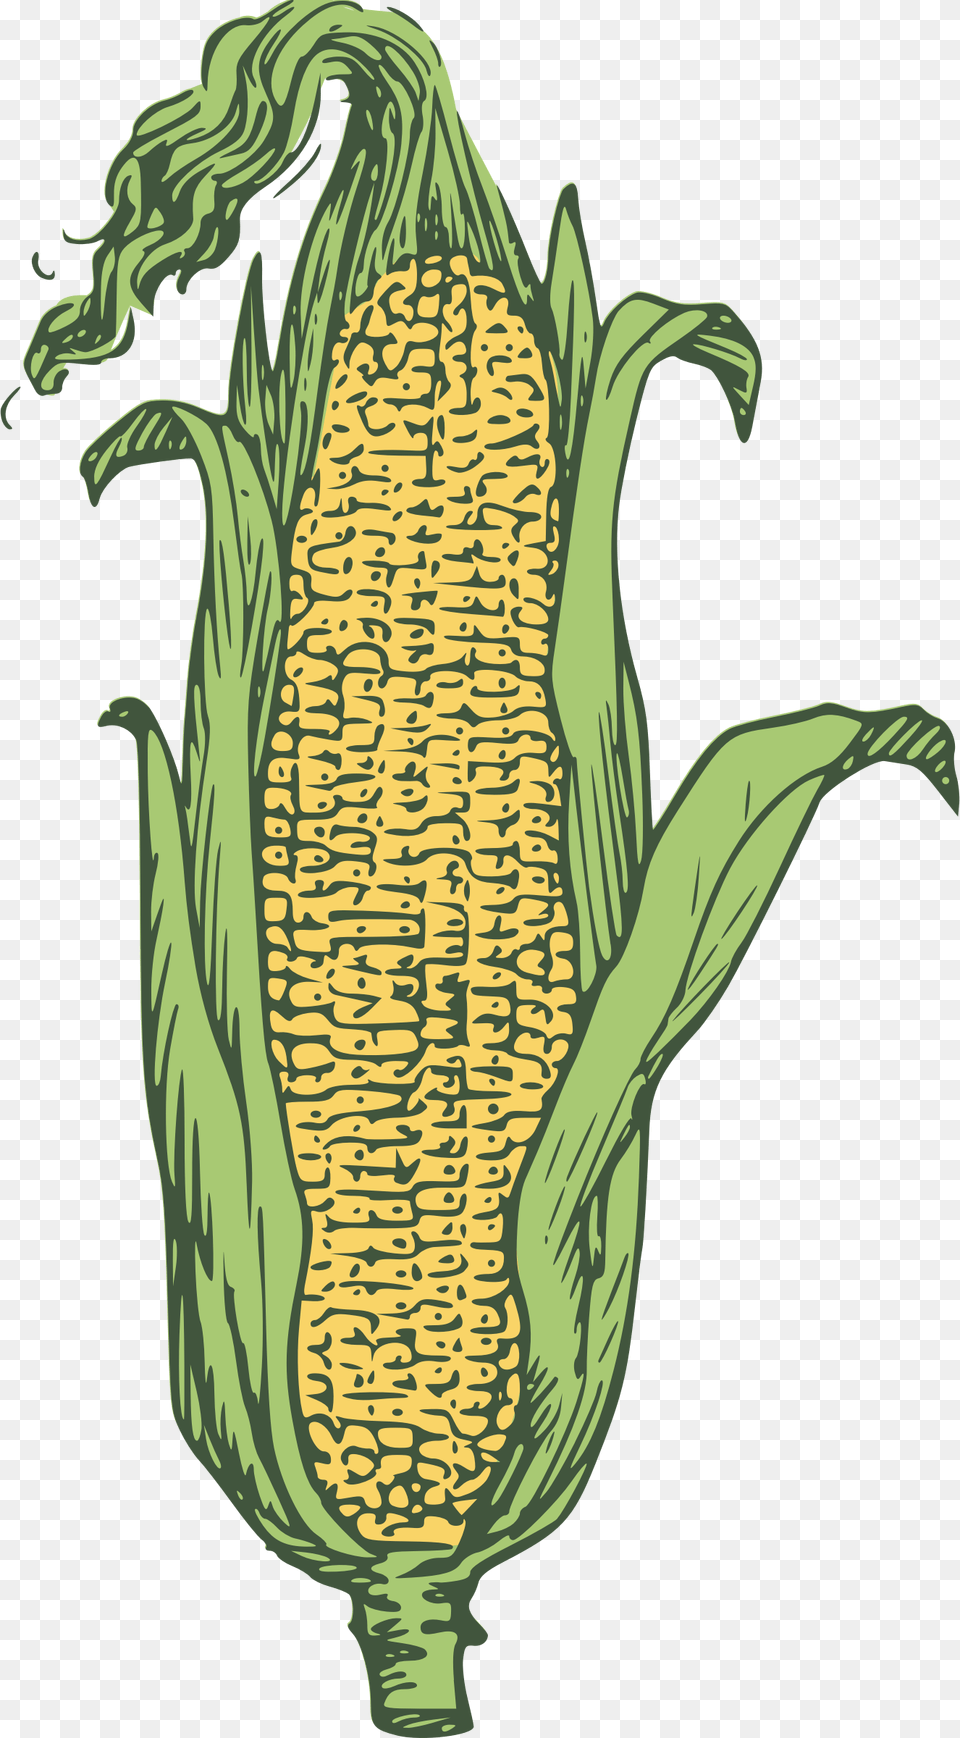 Candy Corn Corn On The Cob Popcorn Maize Ear Grain As Big As A Hen39s Egg, Food, Plant, Produce Png Image